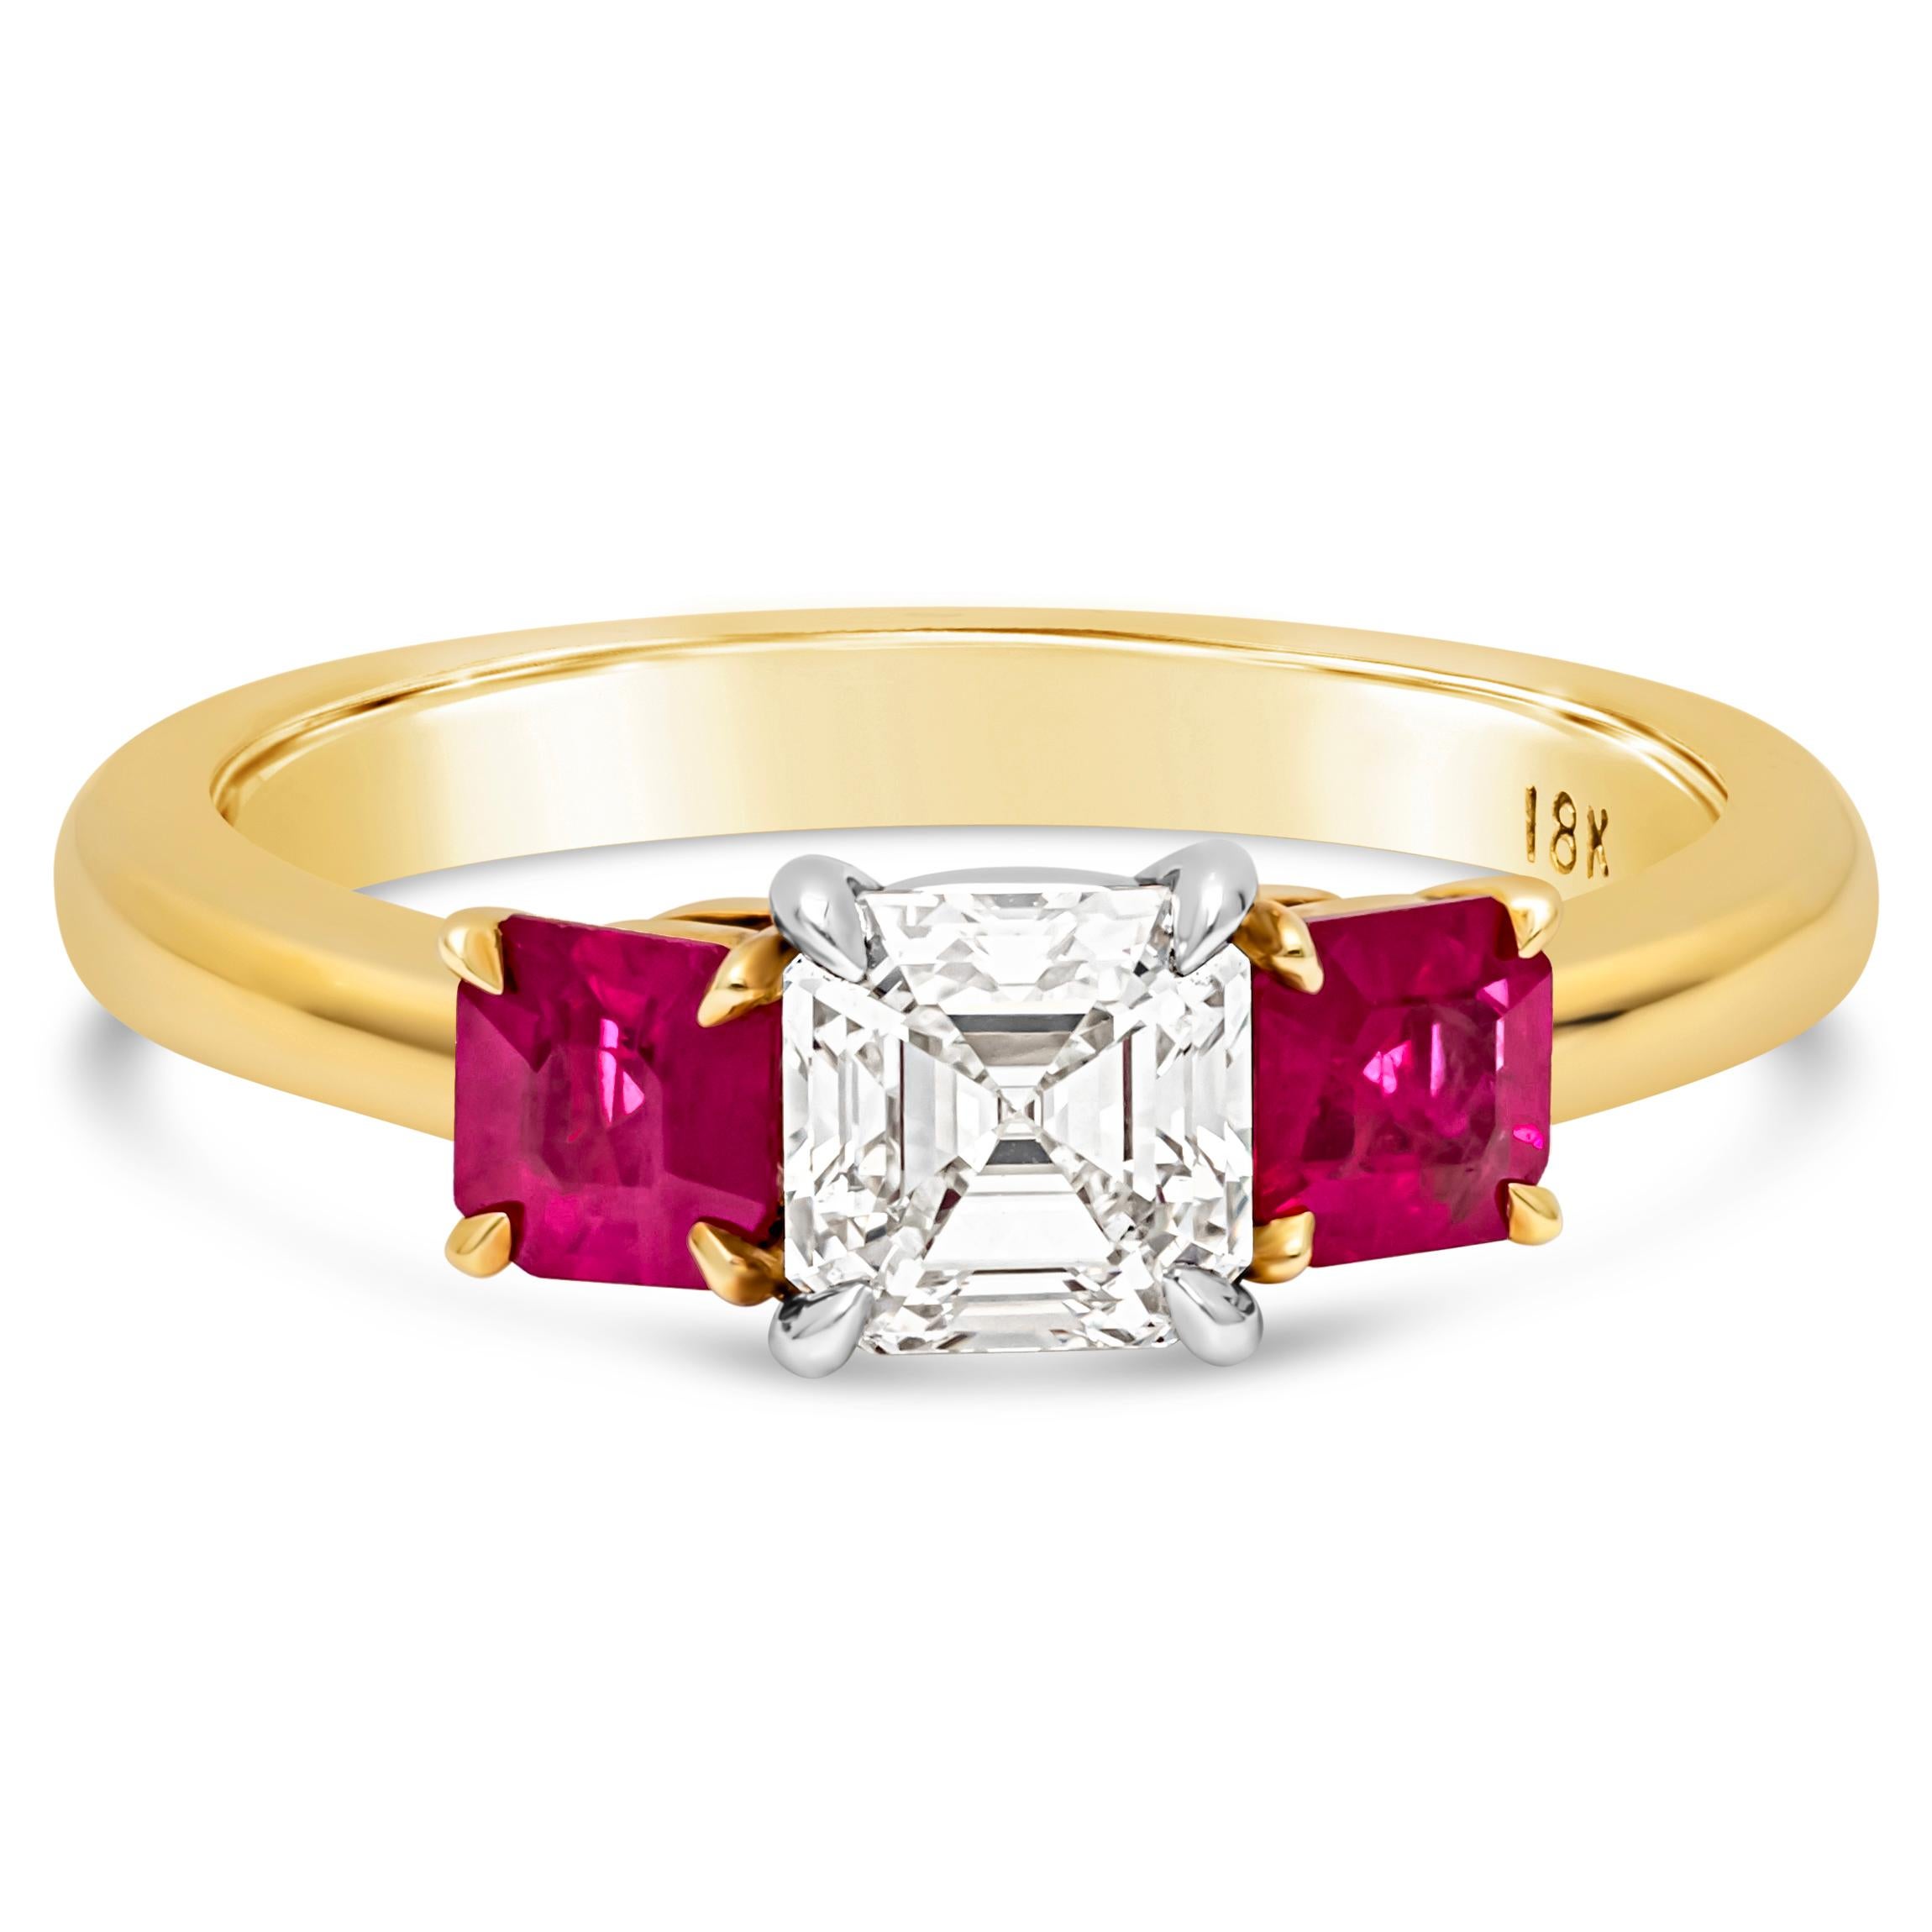 Well crafted three-stone engagement ring featuring a brilliant asscher cut diamond center stone flanked by two asscher cut ruby on each side. Center stone weighs 0.84 carats, G color and VVS2 in clarity set in four prong platinum basket setting.